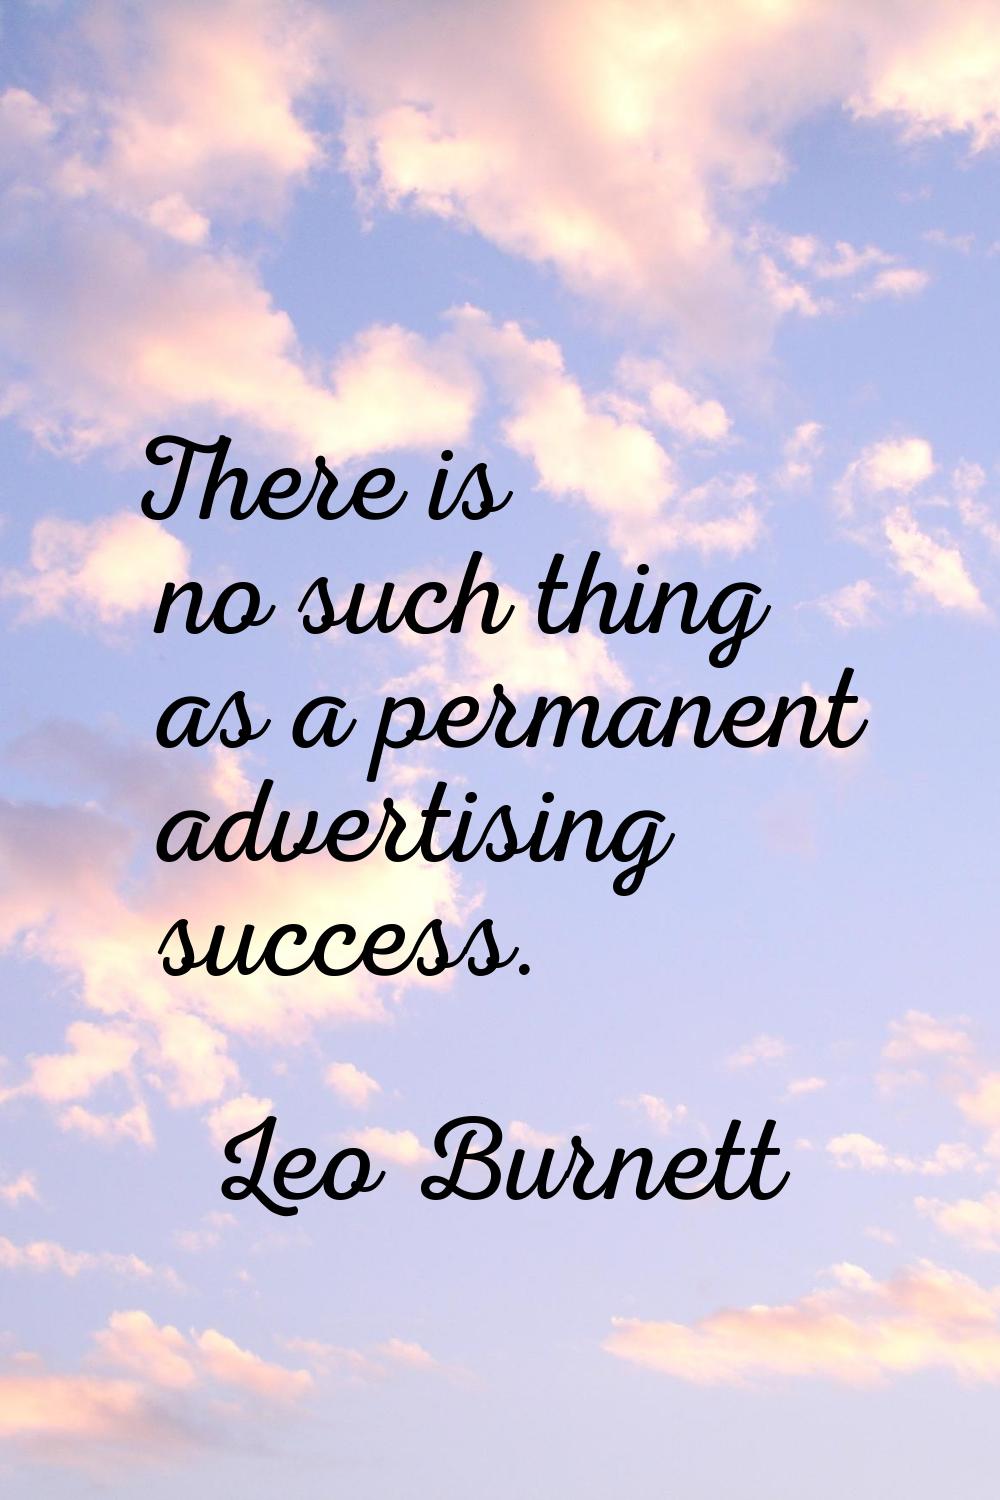 There is no such thing as a permanent advertising success.